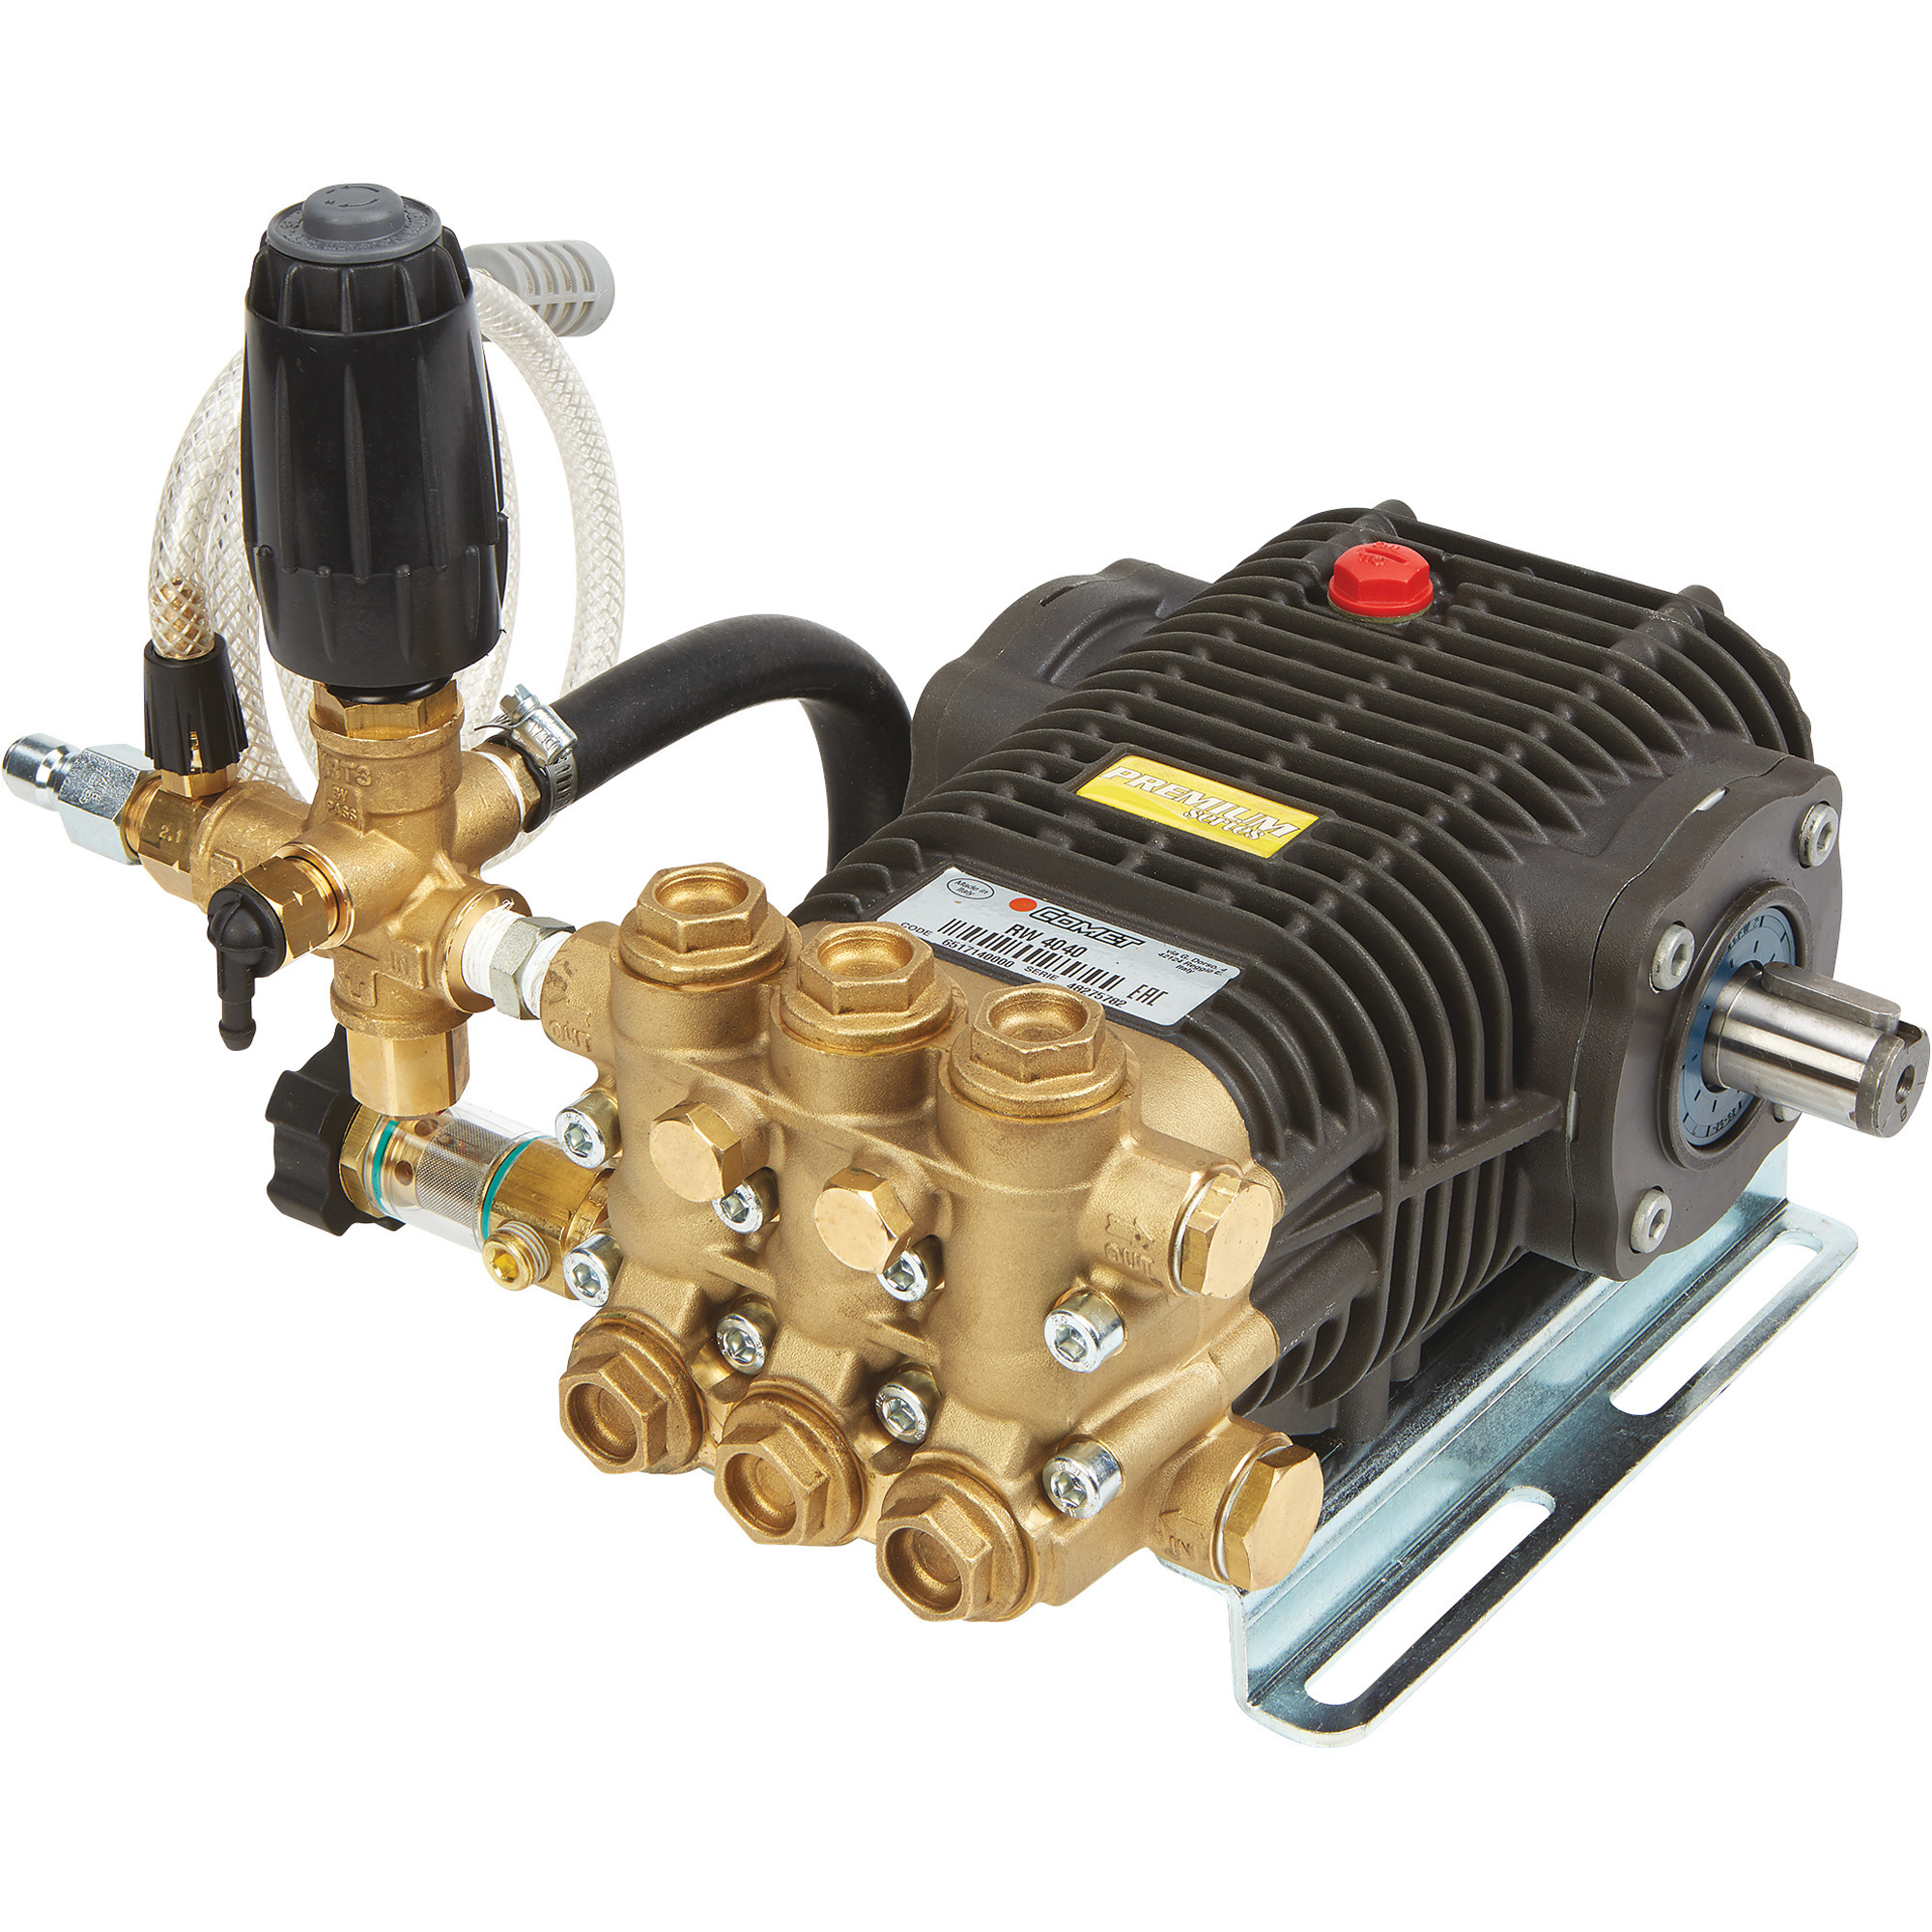 Comet Pressure Washer Pump Assembly, 4000 PSI, 3.5 GPM, Belt Drive, Gas/Electric, Model RW 4040S